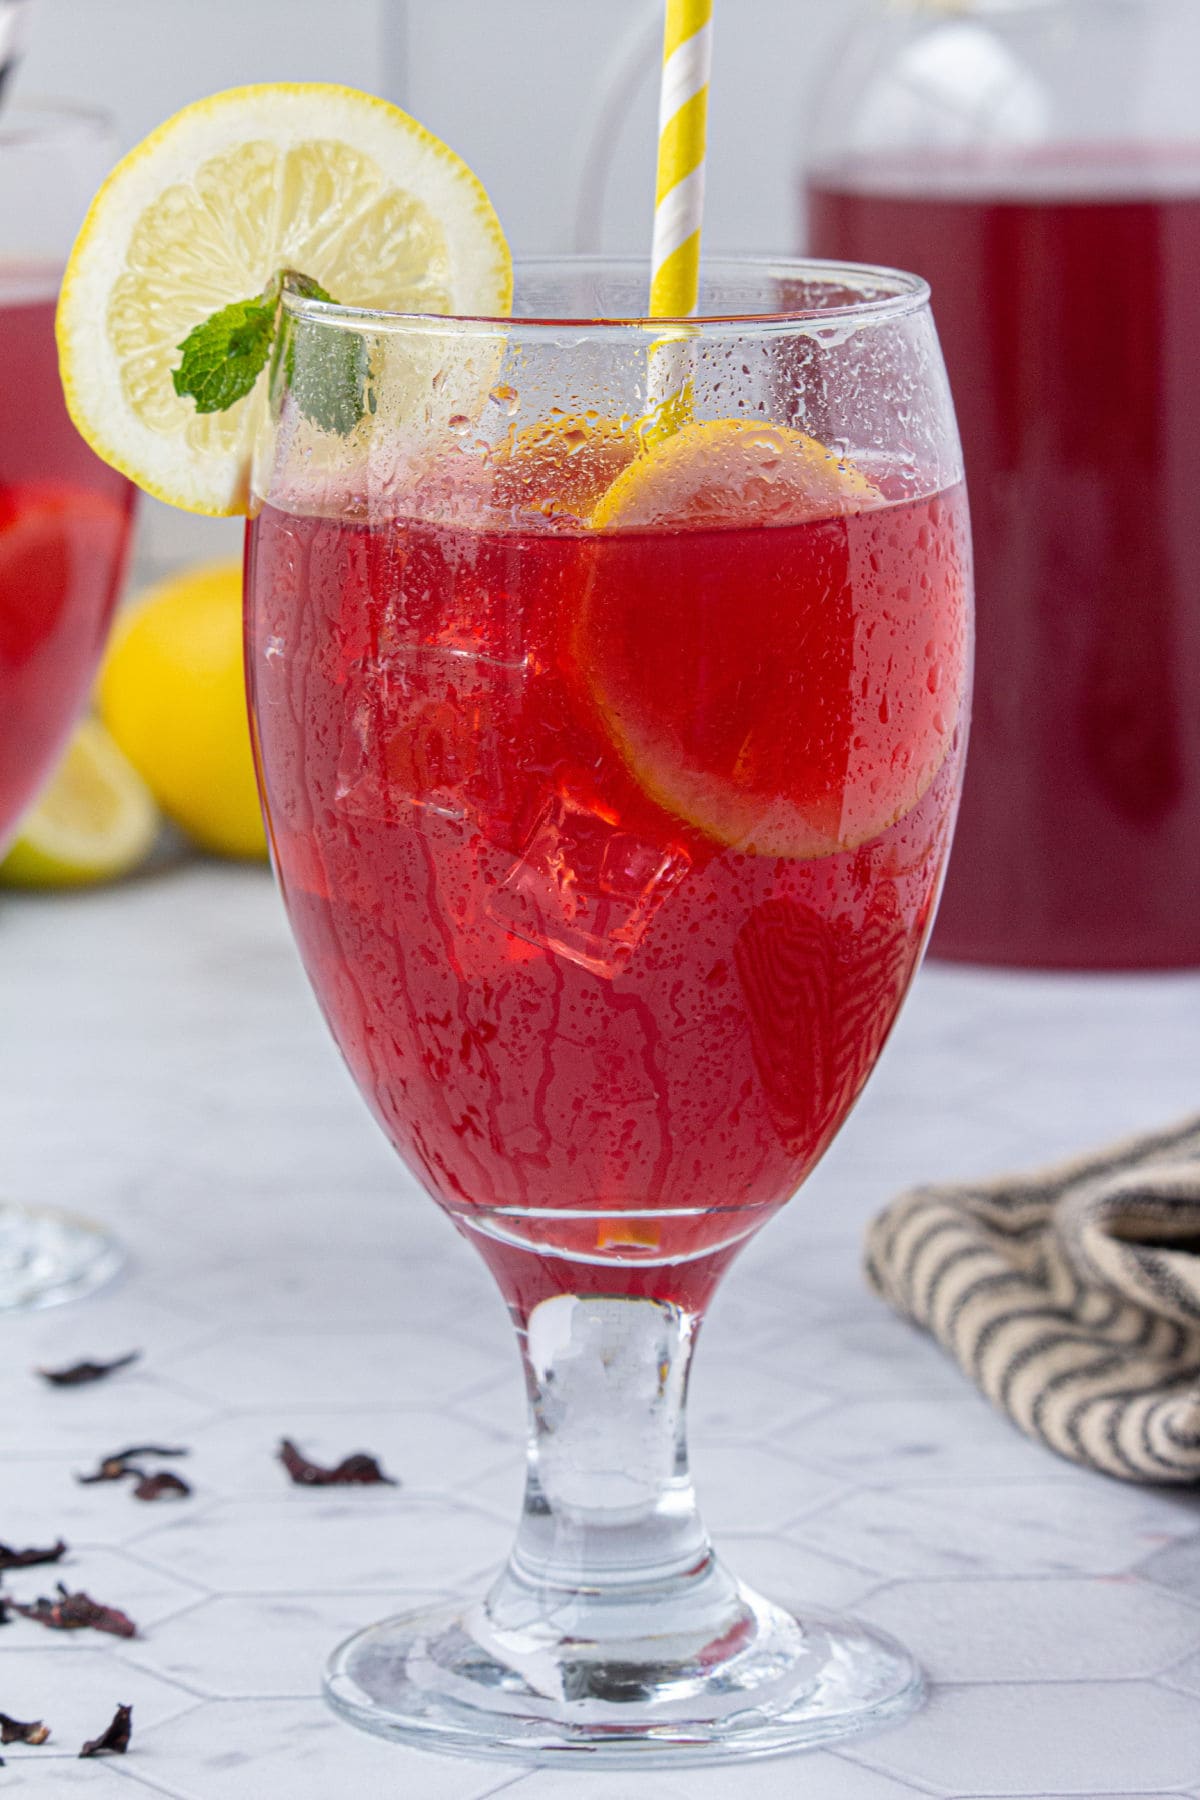 A glass of bright red hibiscus lemonade with a yellow and white straw.